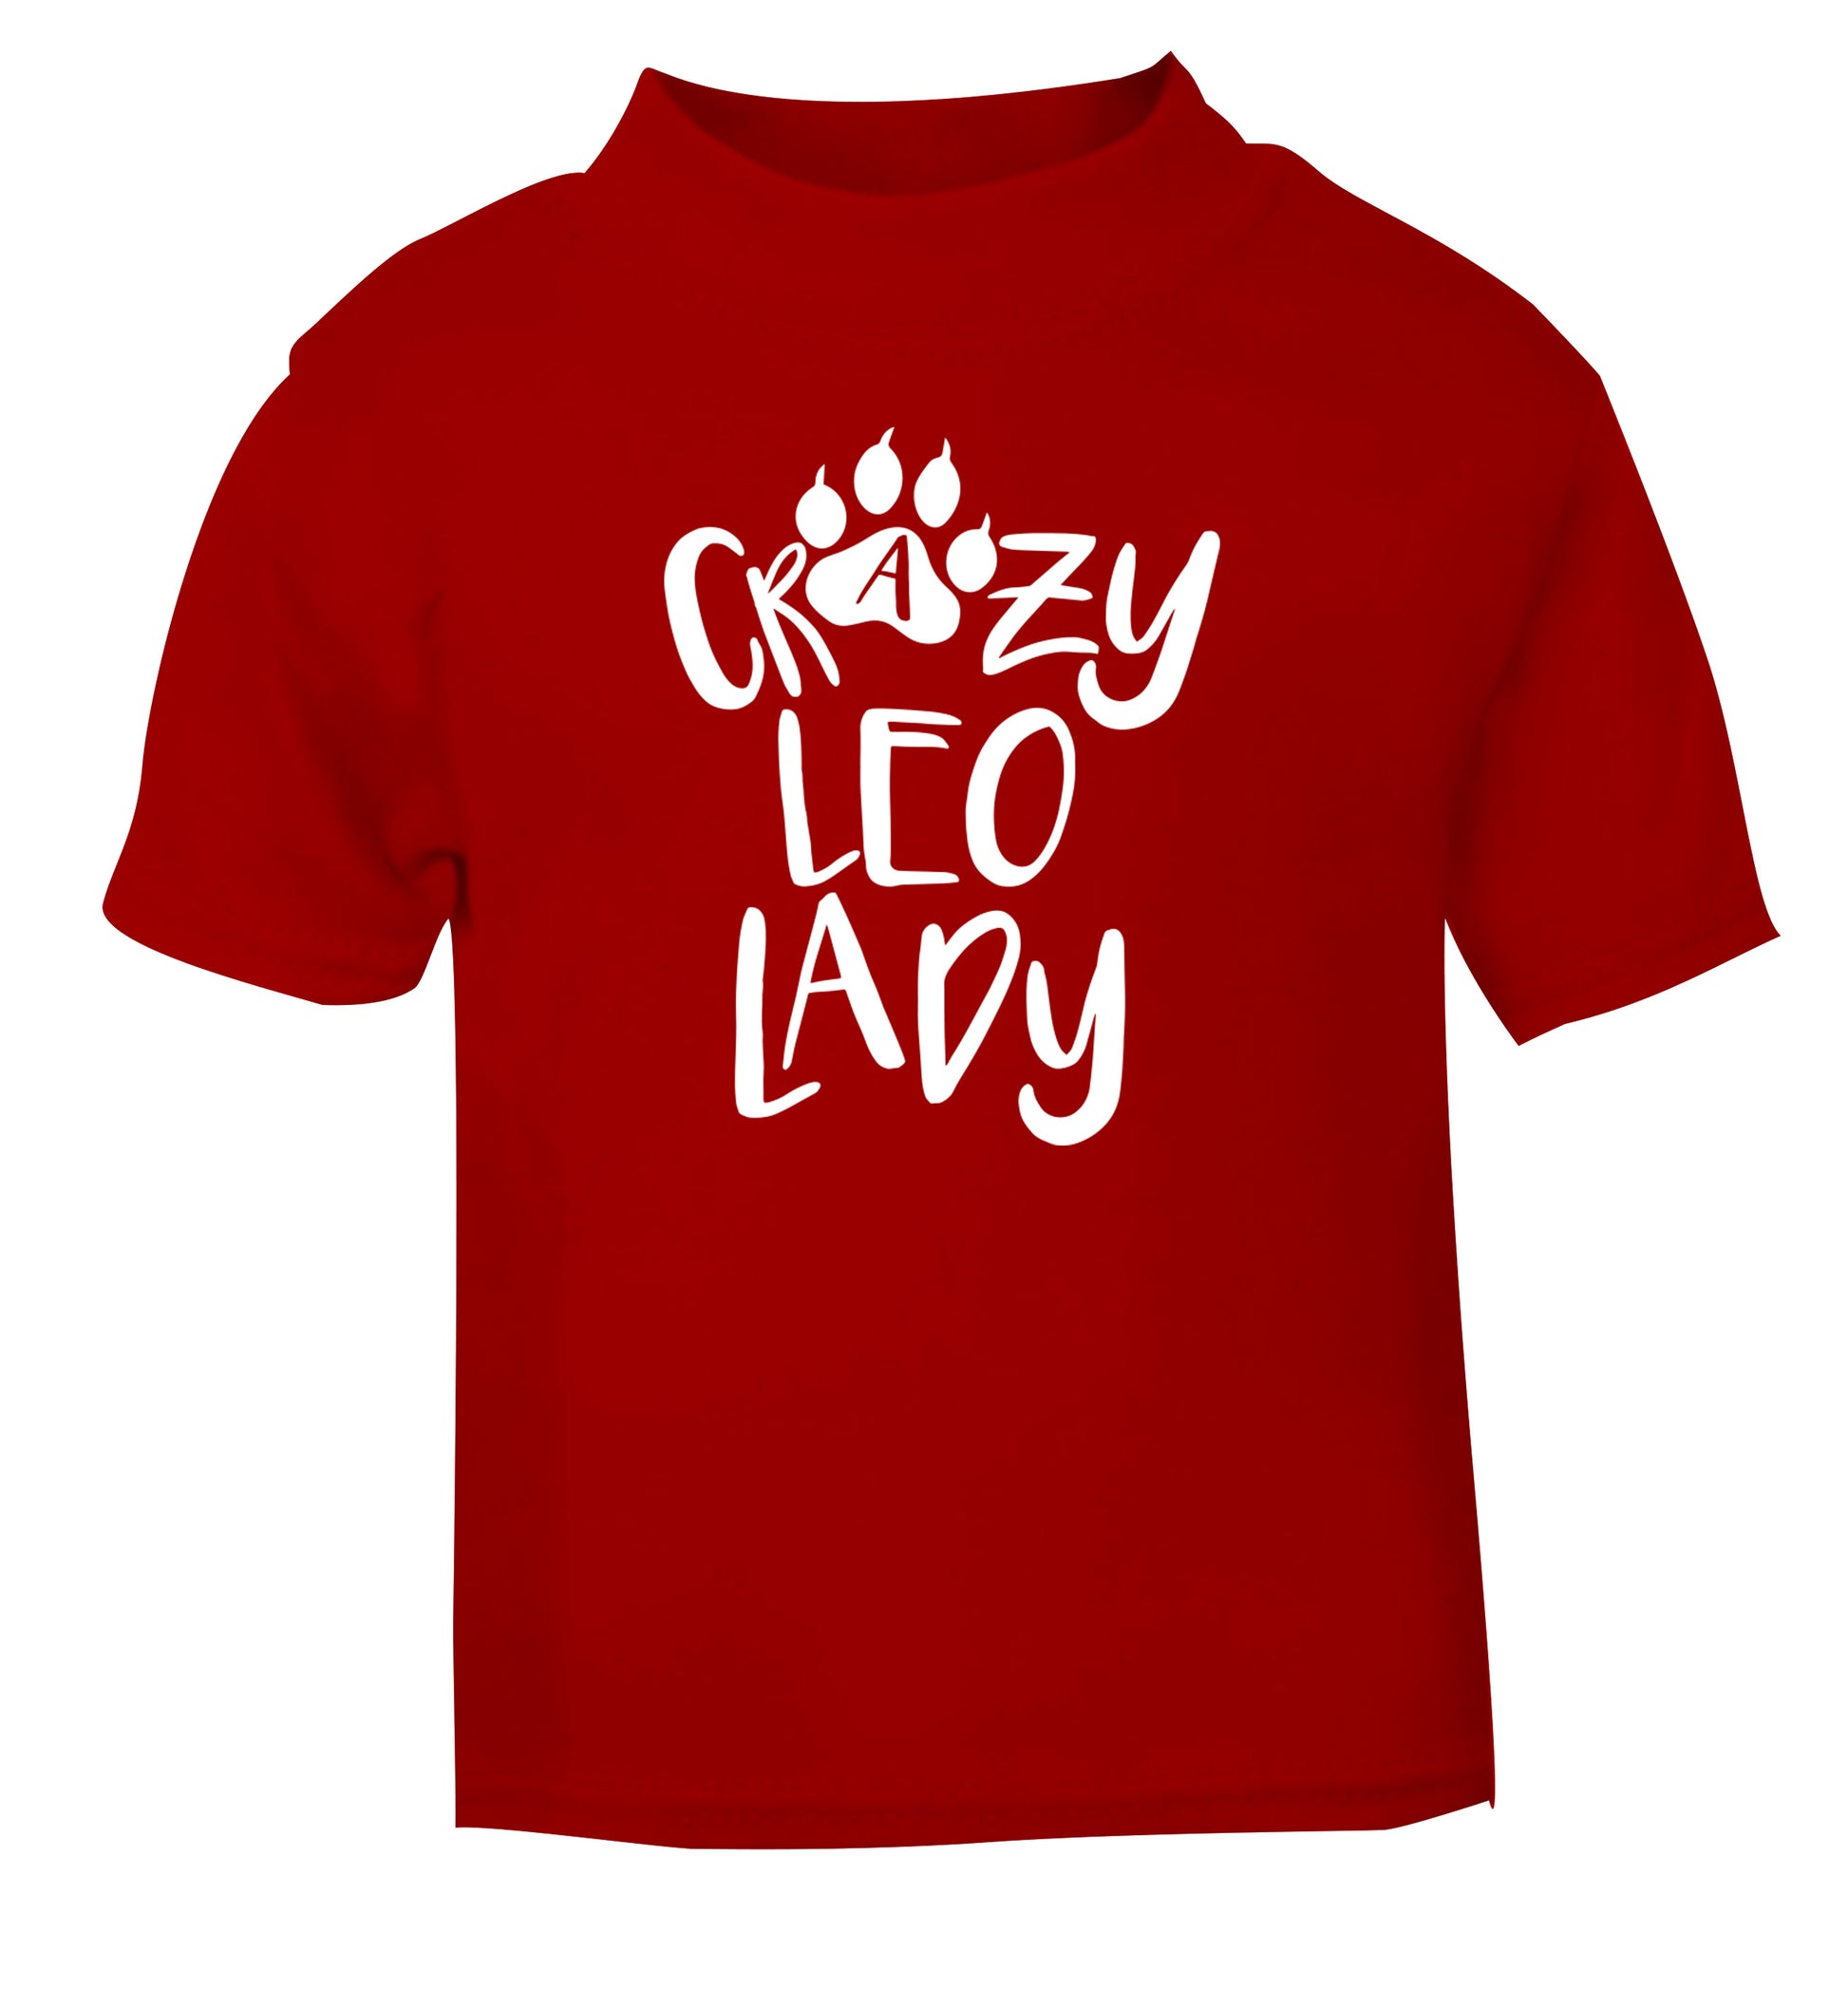 Crazy leo lady red Baby Toddler Tshirt 2 Years